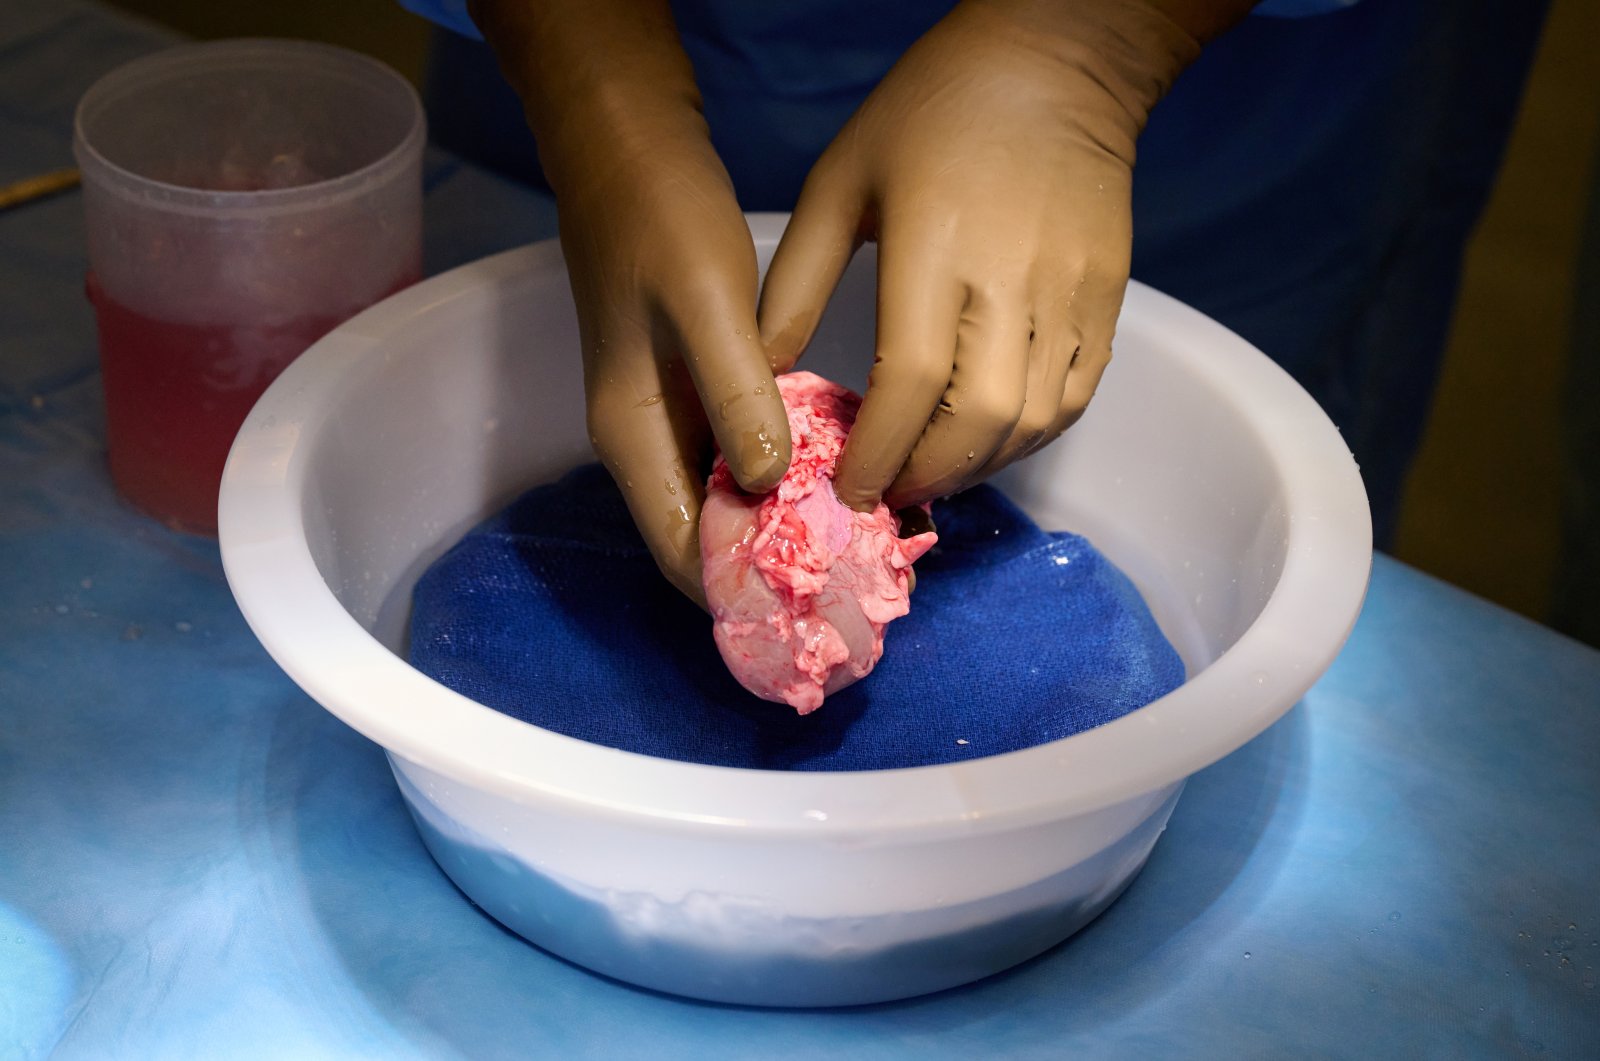 A genetically engineered pig kidney is cleaned and prepared for transplantation to a human at NYU Langone in New York, U.S. (Reuters Photo)